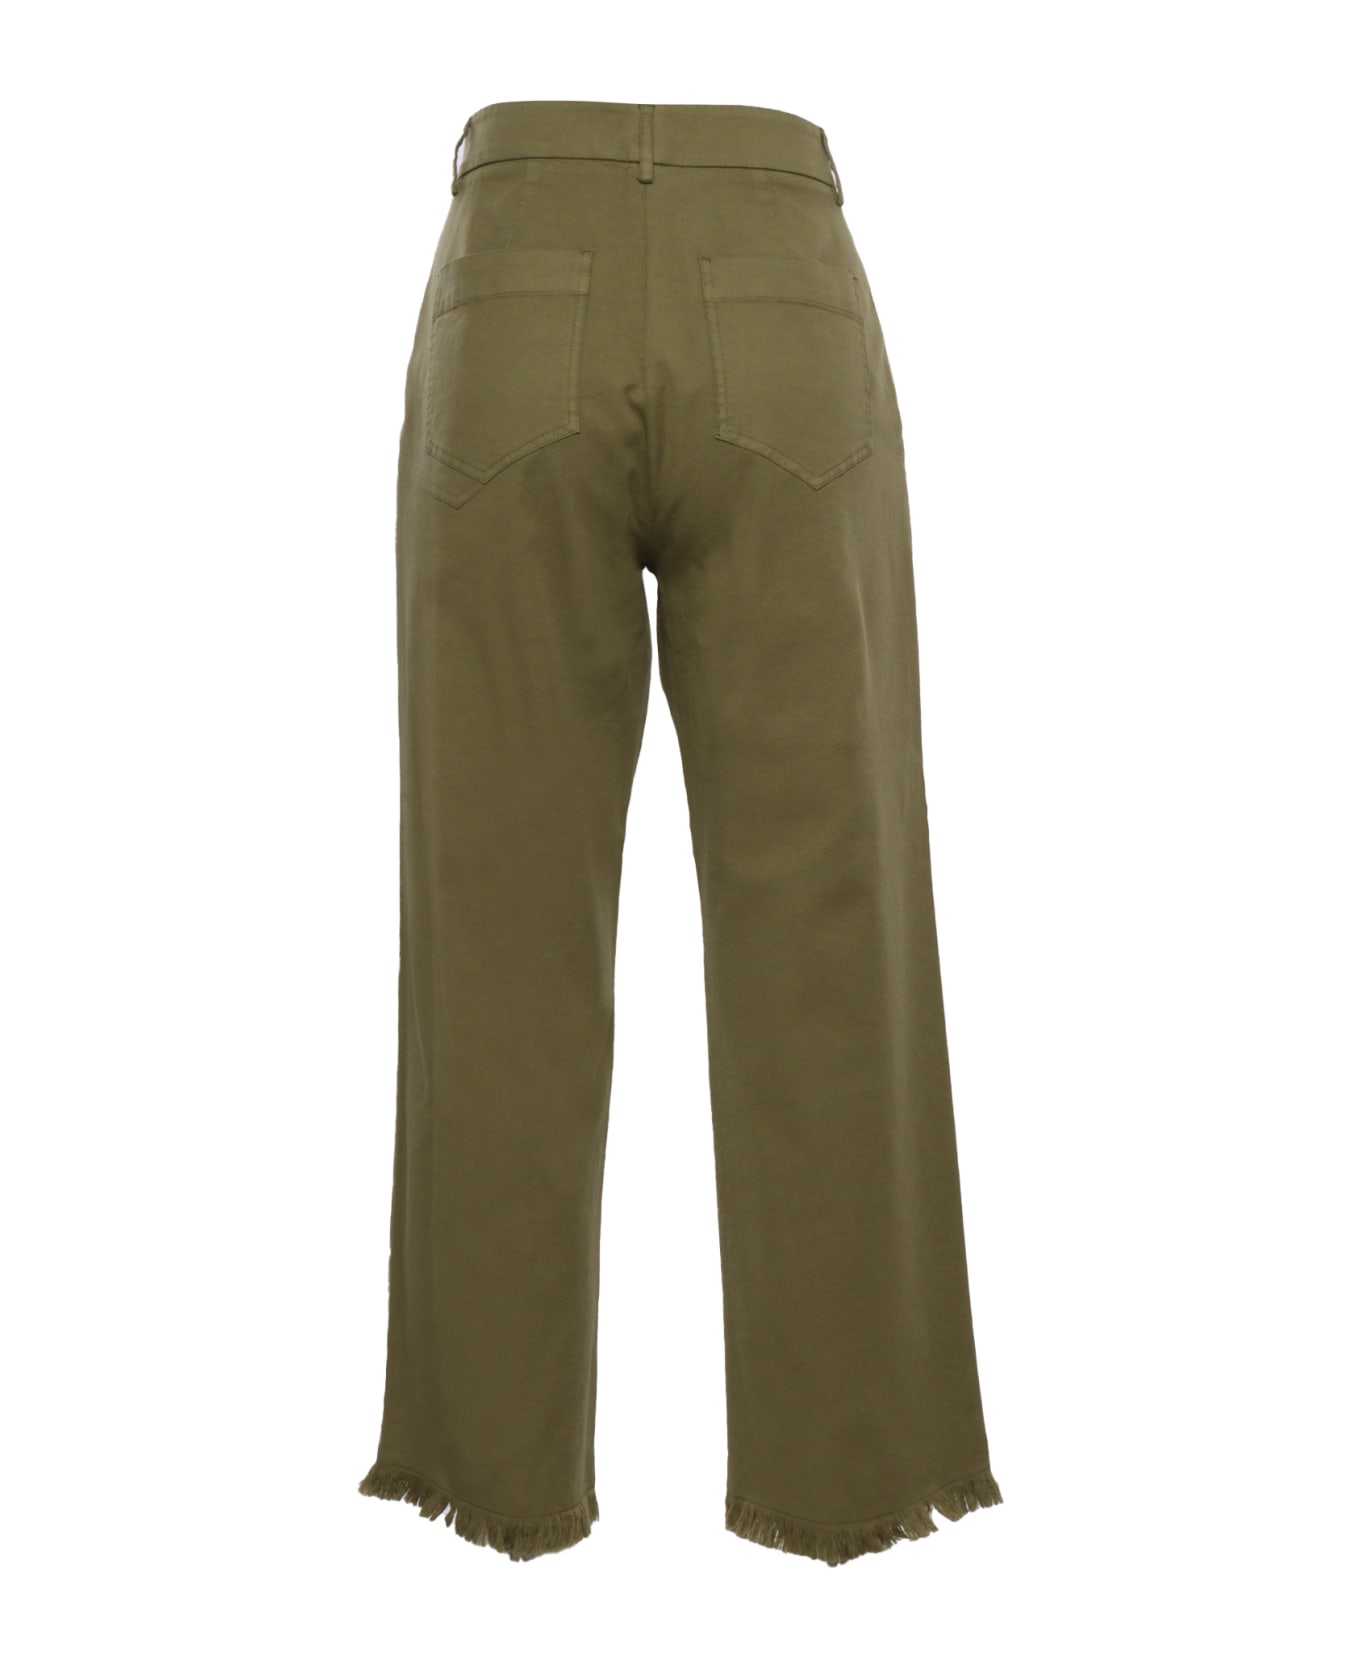 Antonelli Military Green Jeans - GREEN ボトムス